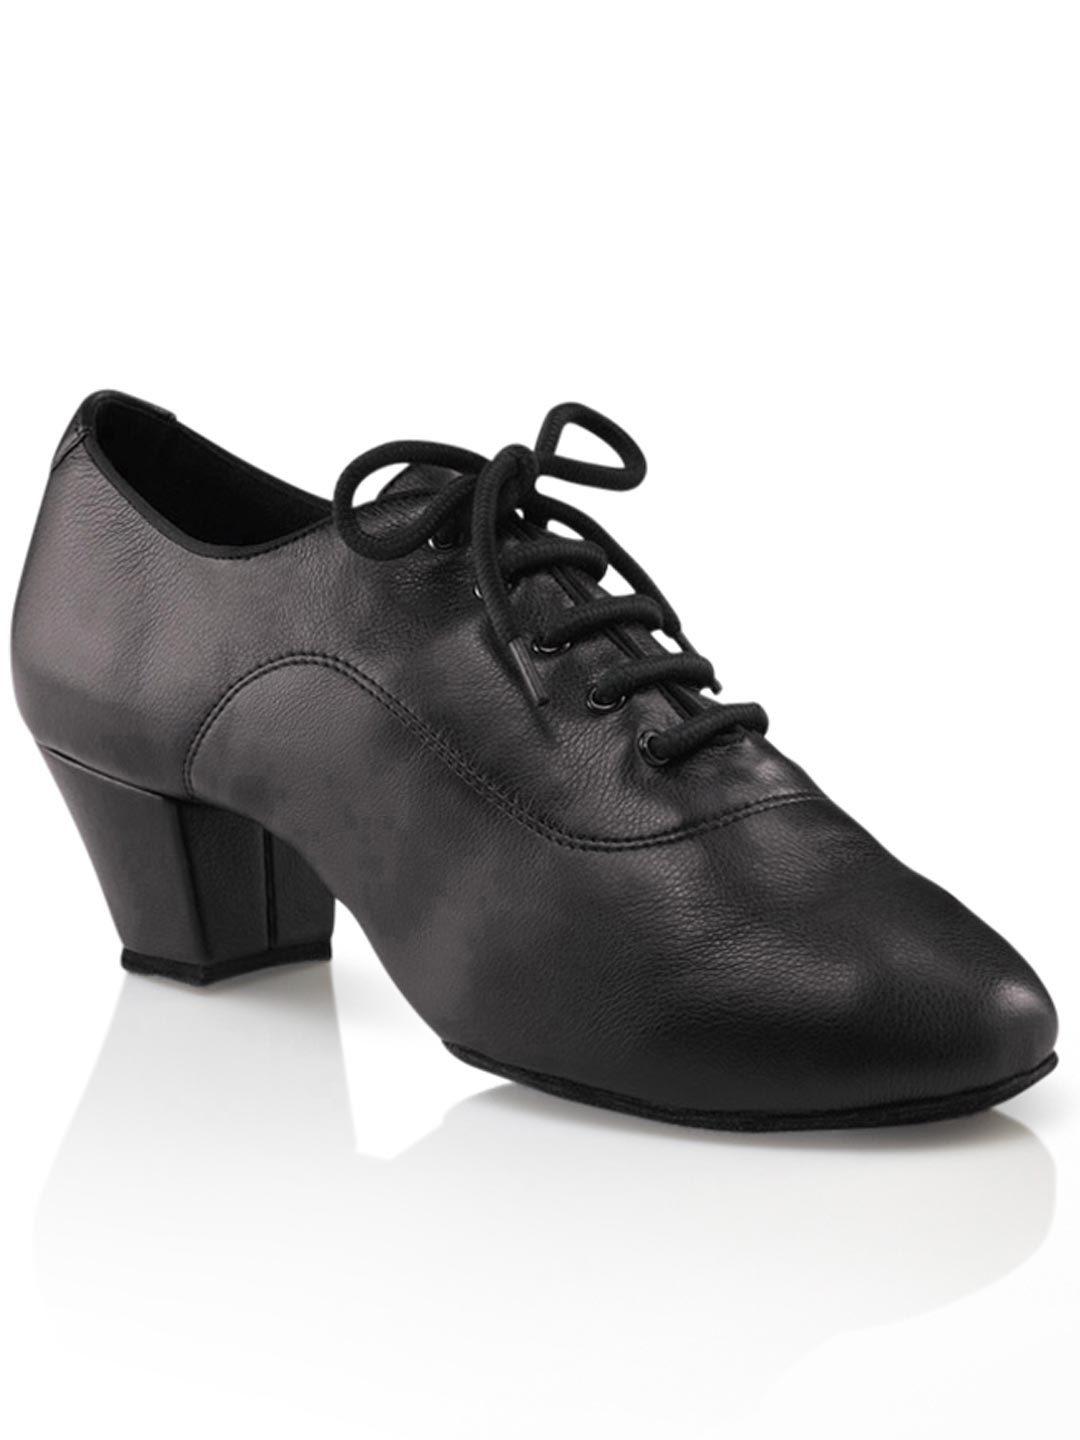 mens dress shoes for dancing